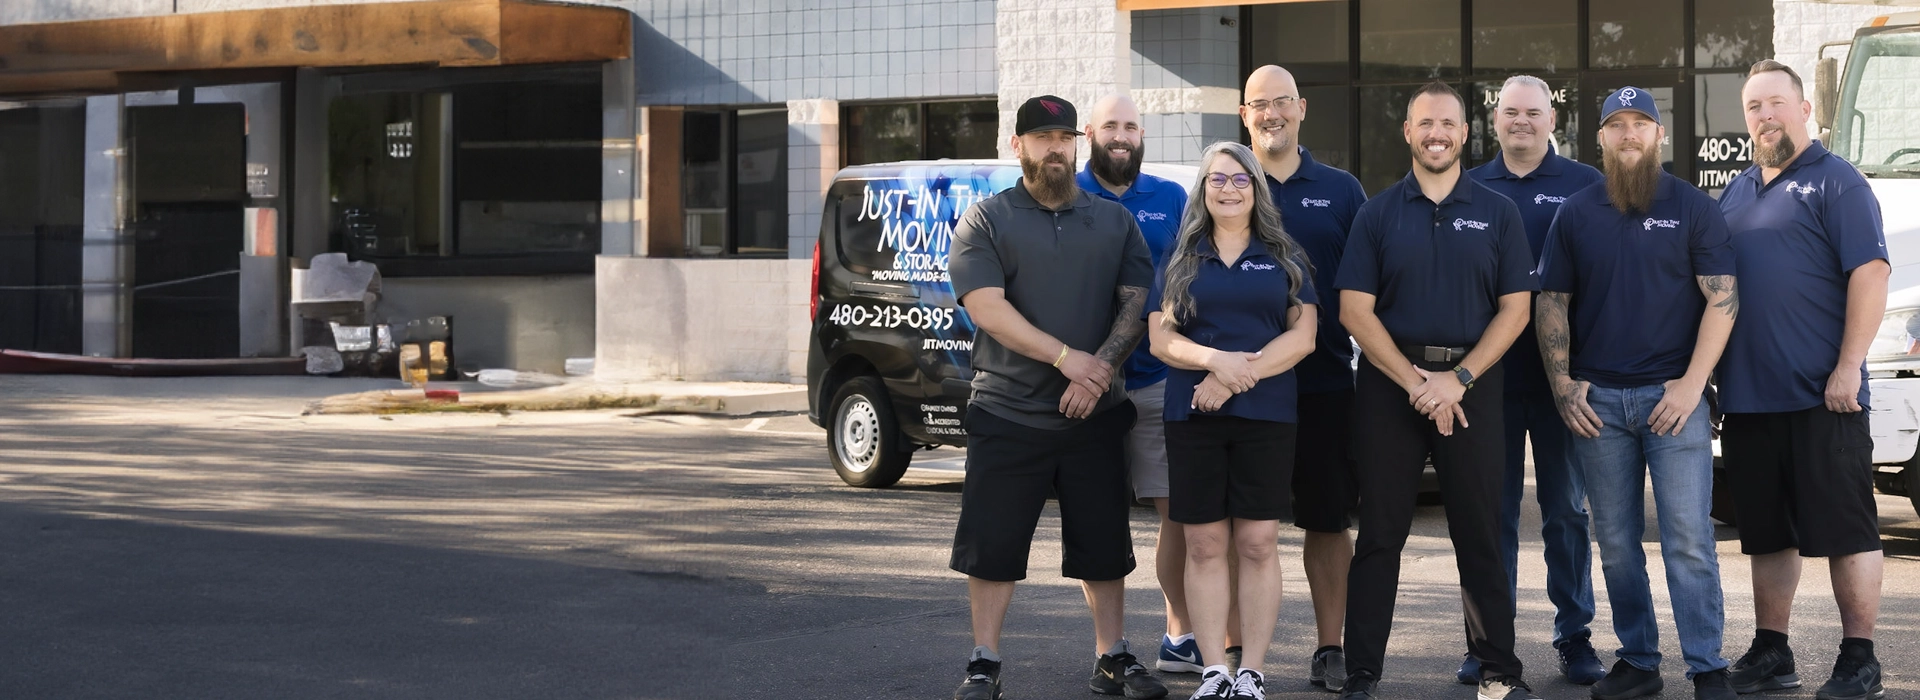 Moving & Storage Company in Phoenix AZ - Just-in Time Moving and Storage